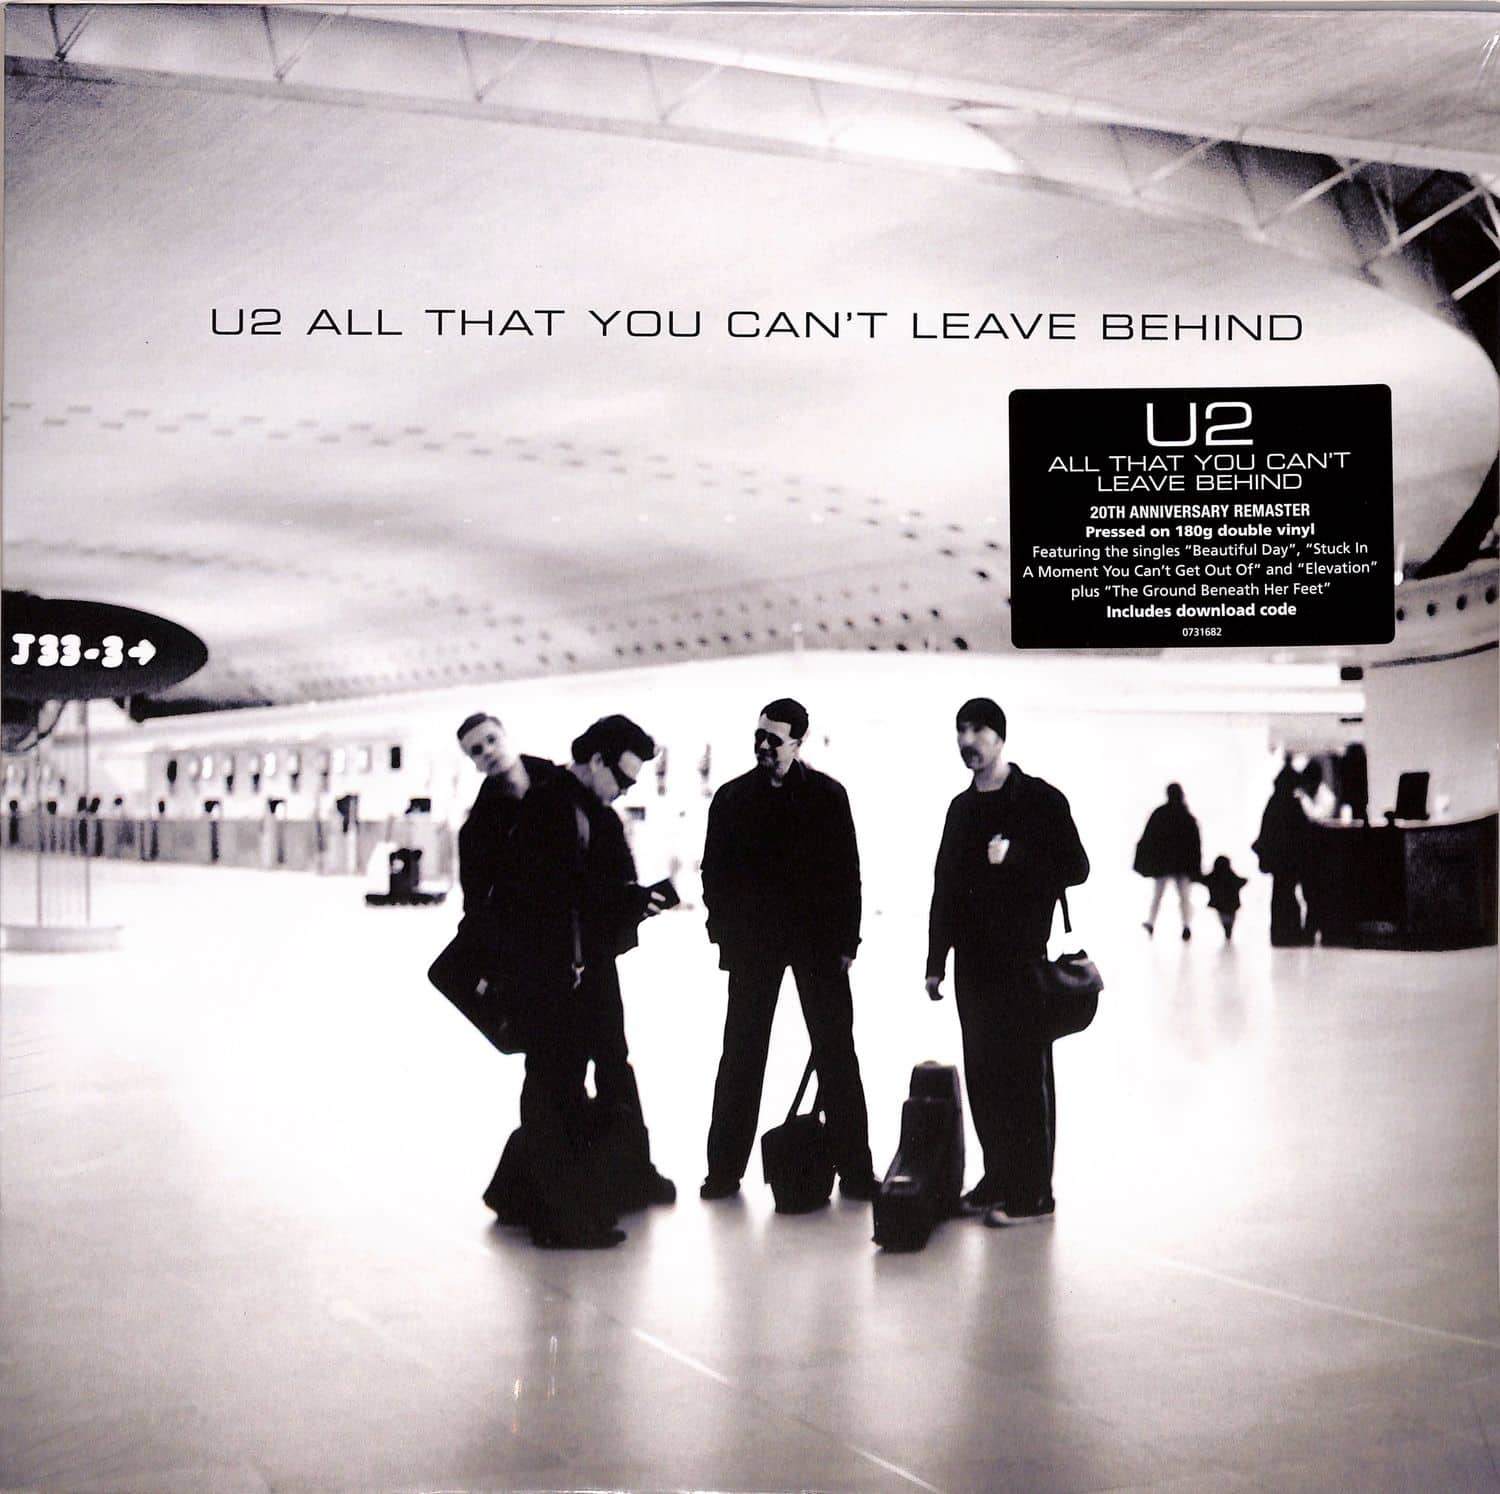 U2 - ALL THAT YOU CANT LEAVE BEHIND 